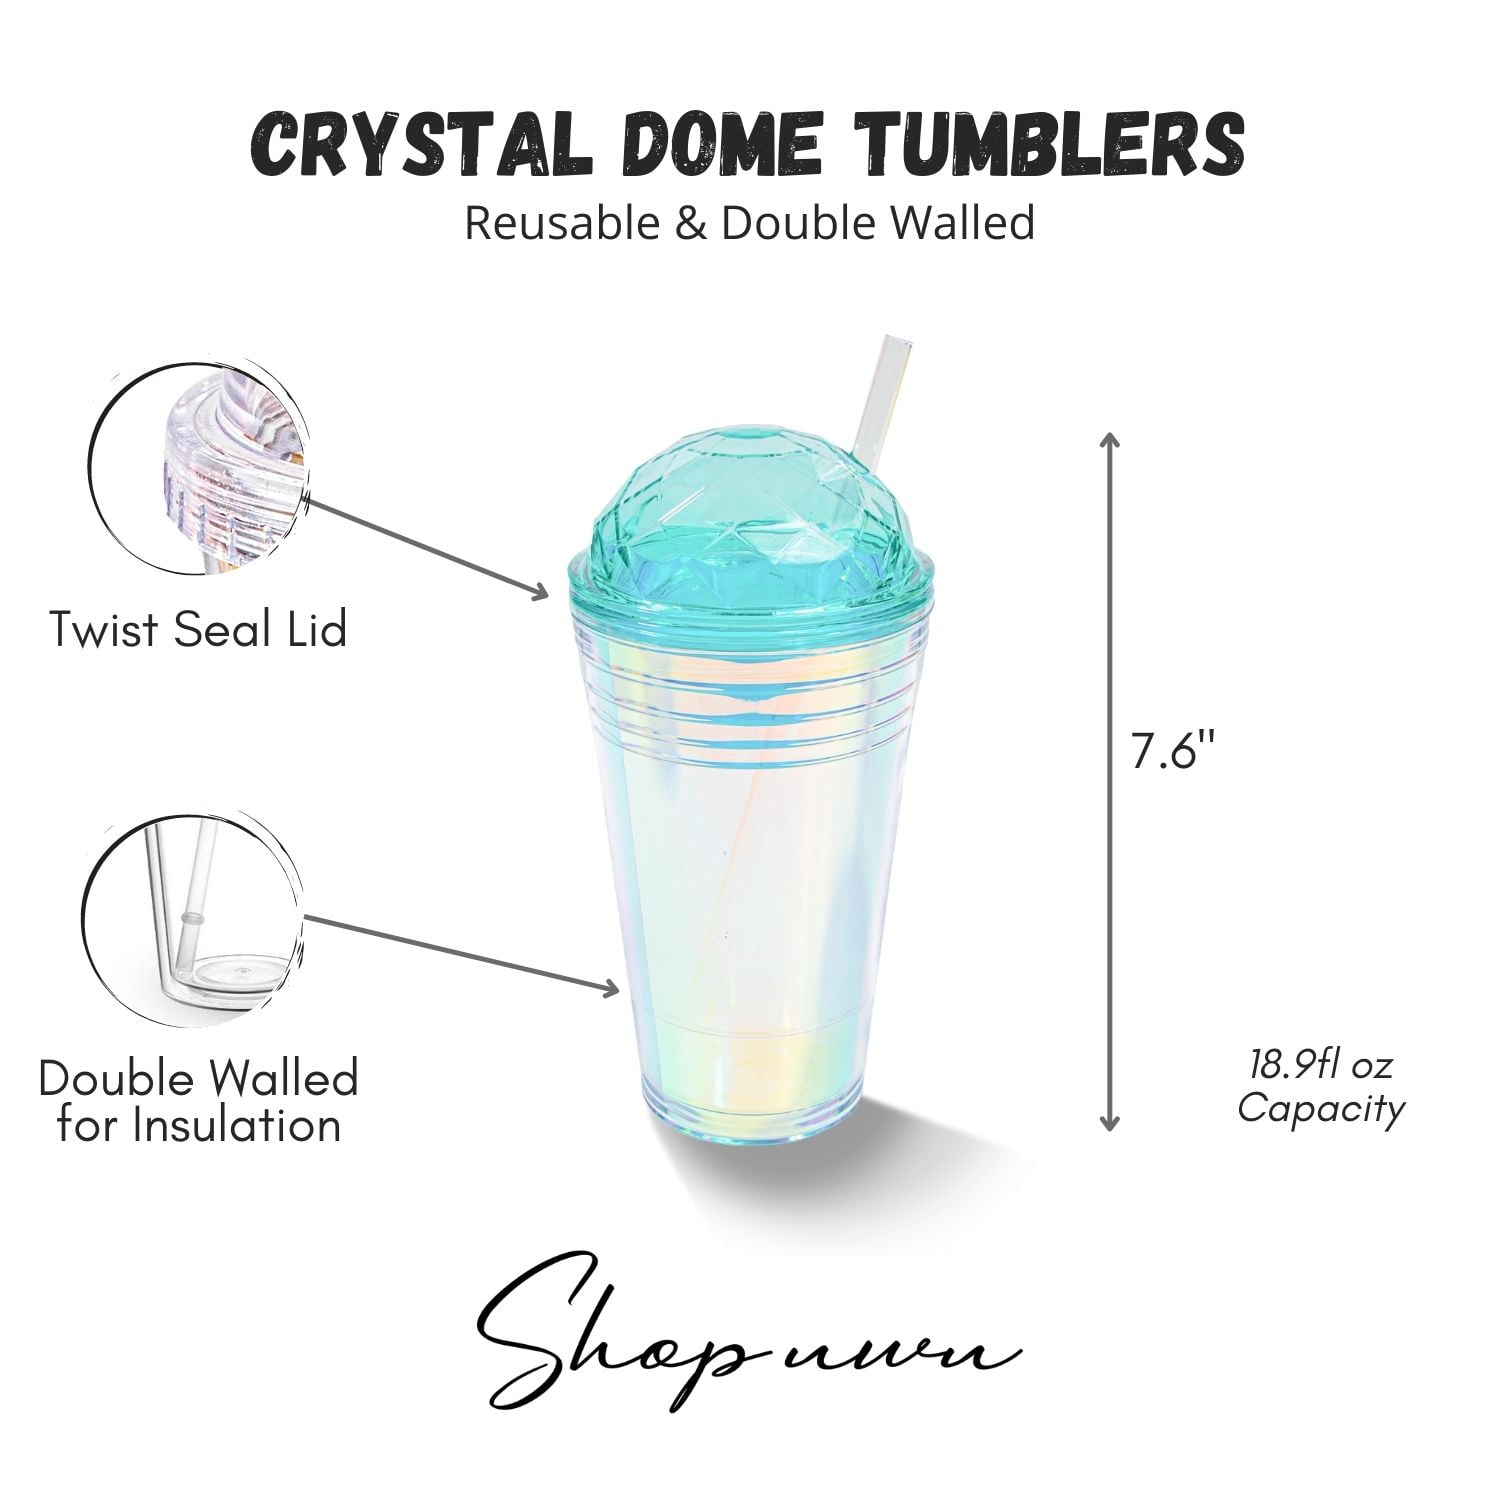 IWOLOMI Glass Dome Tumbler, 4 Pack Glass Tumbler with Dome Lid for Frappes,  Glass Smoothie Cups Heat…See more IWOLOMI Glass Dome Tumbler, 4 Pack Glass